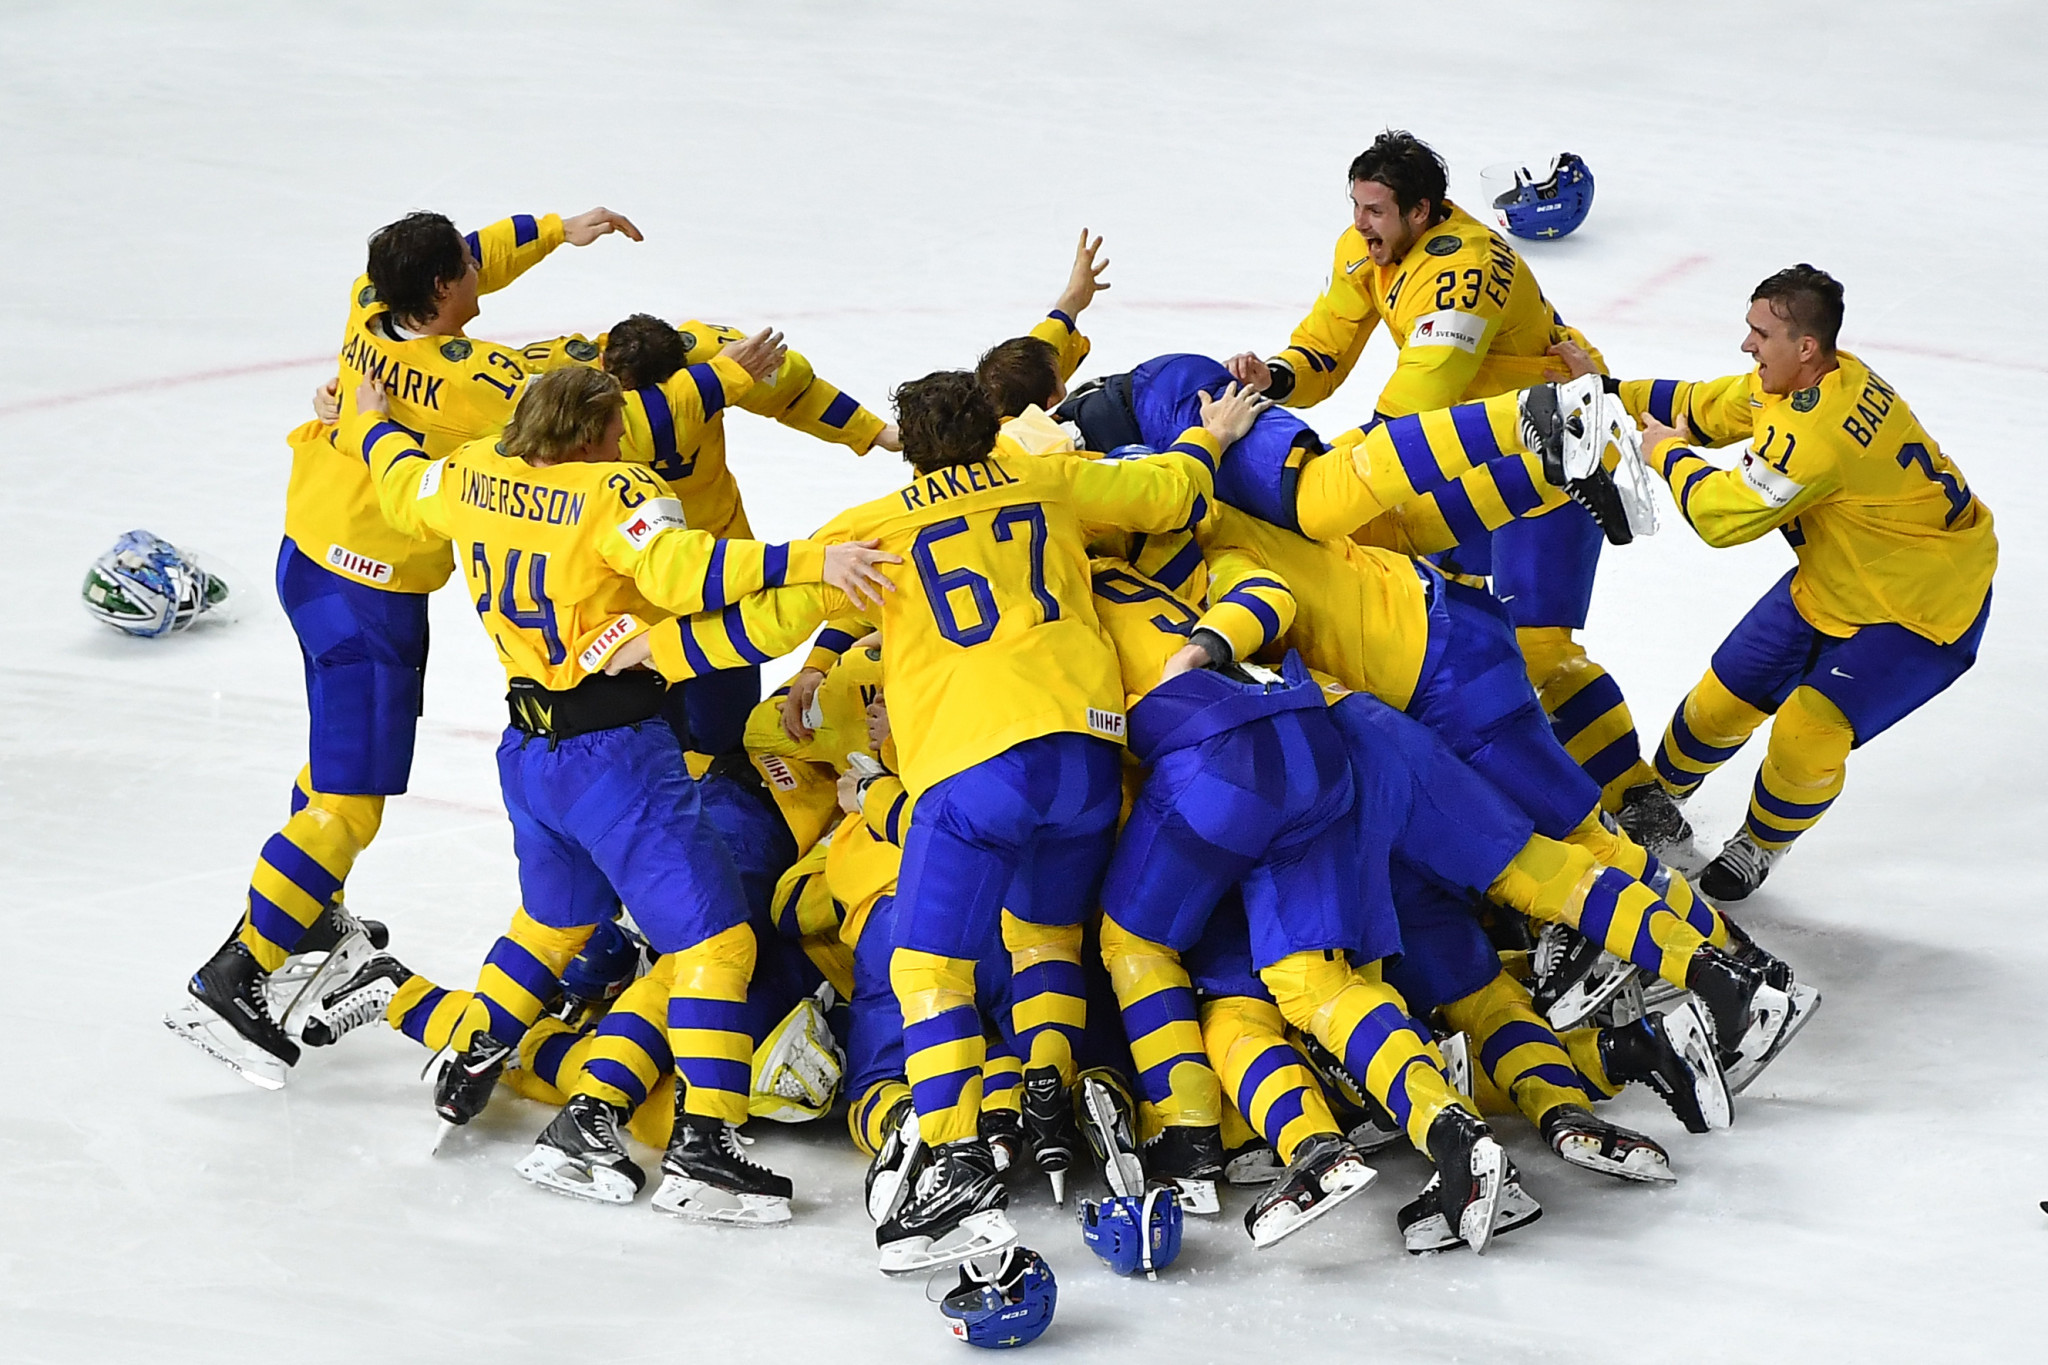 Sweden won the 2018 IIHF World Championship, defeating Switzerland in the final ©Getty Images